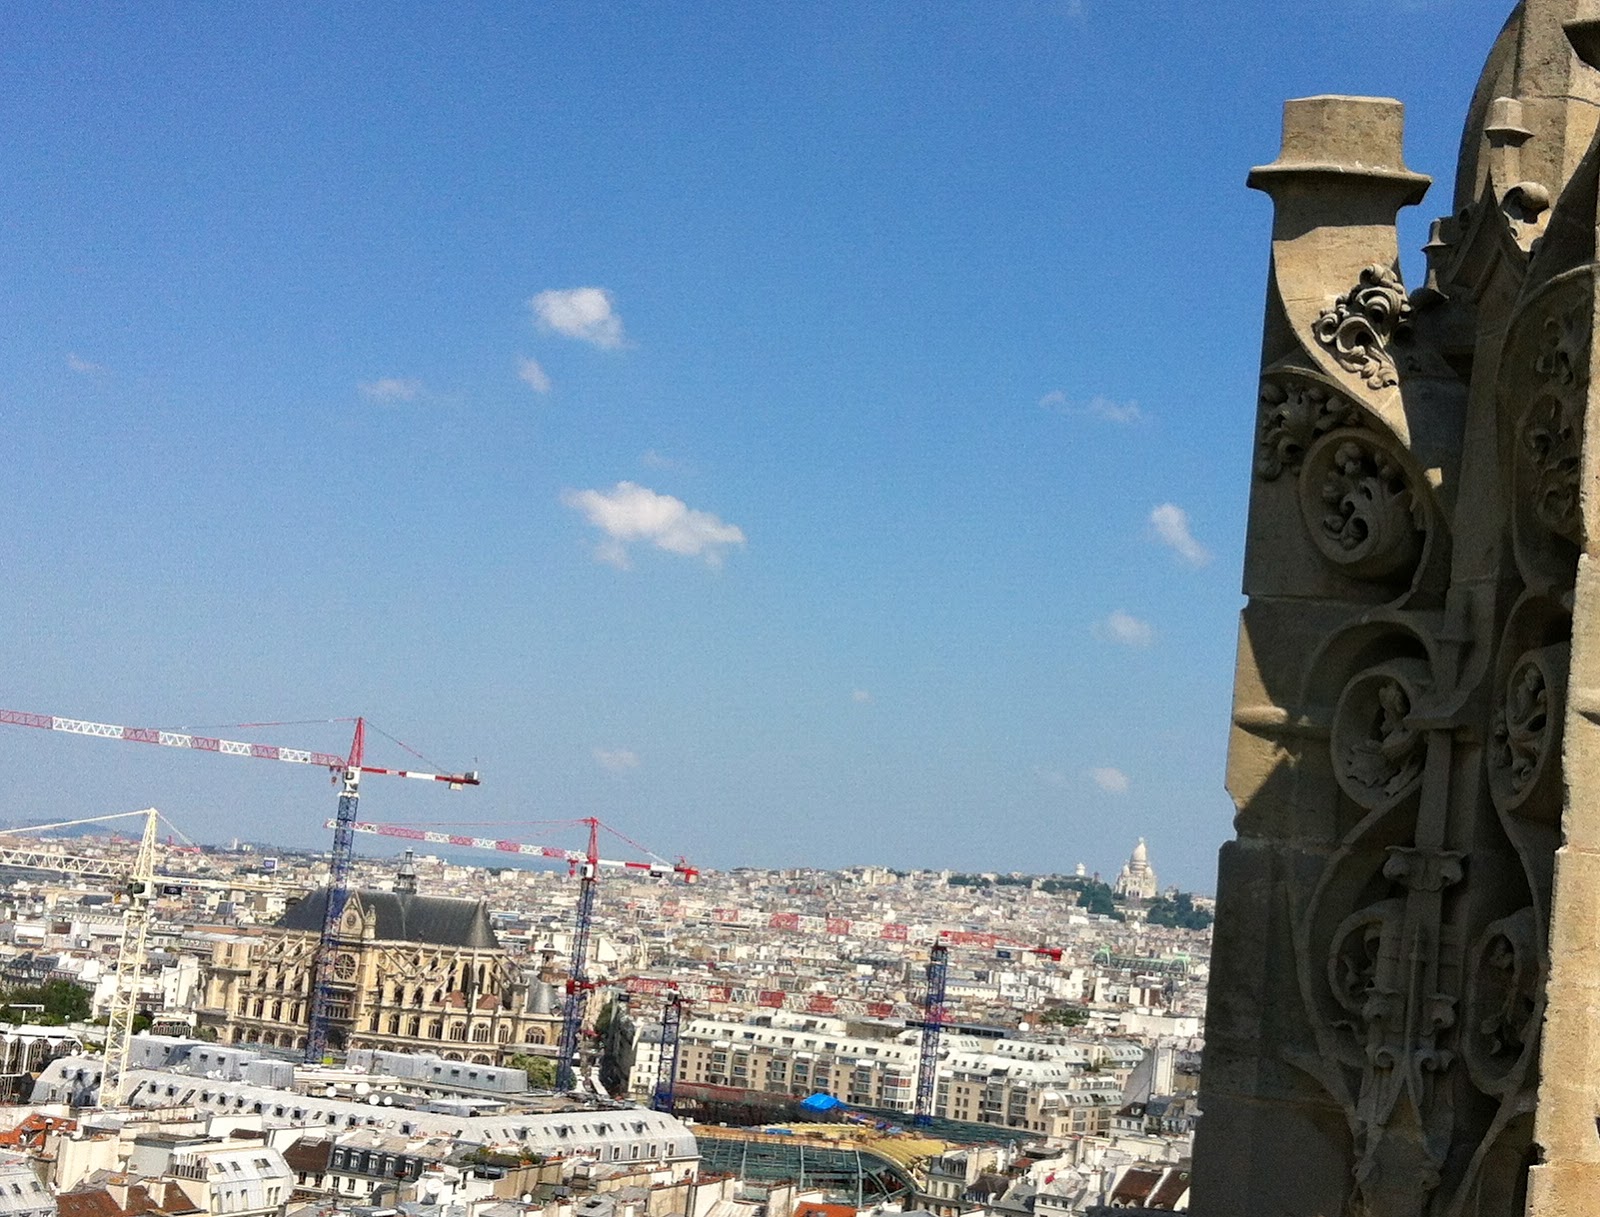 Postcards from Paris: July 2013